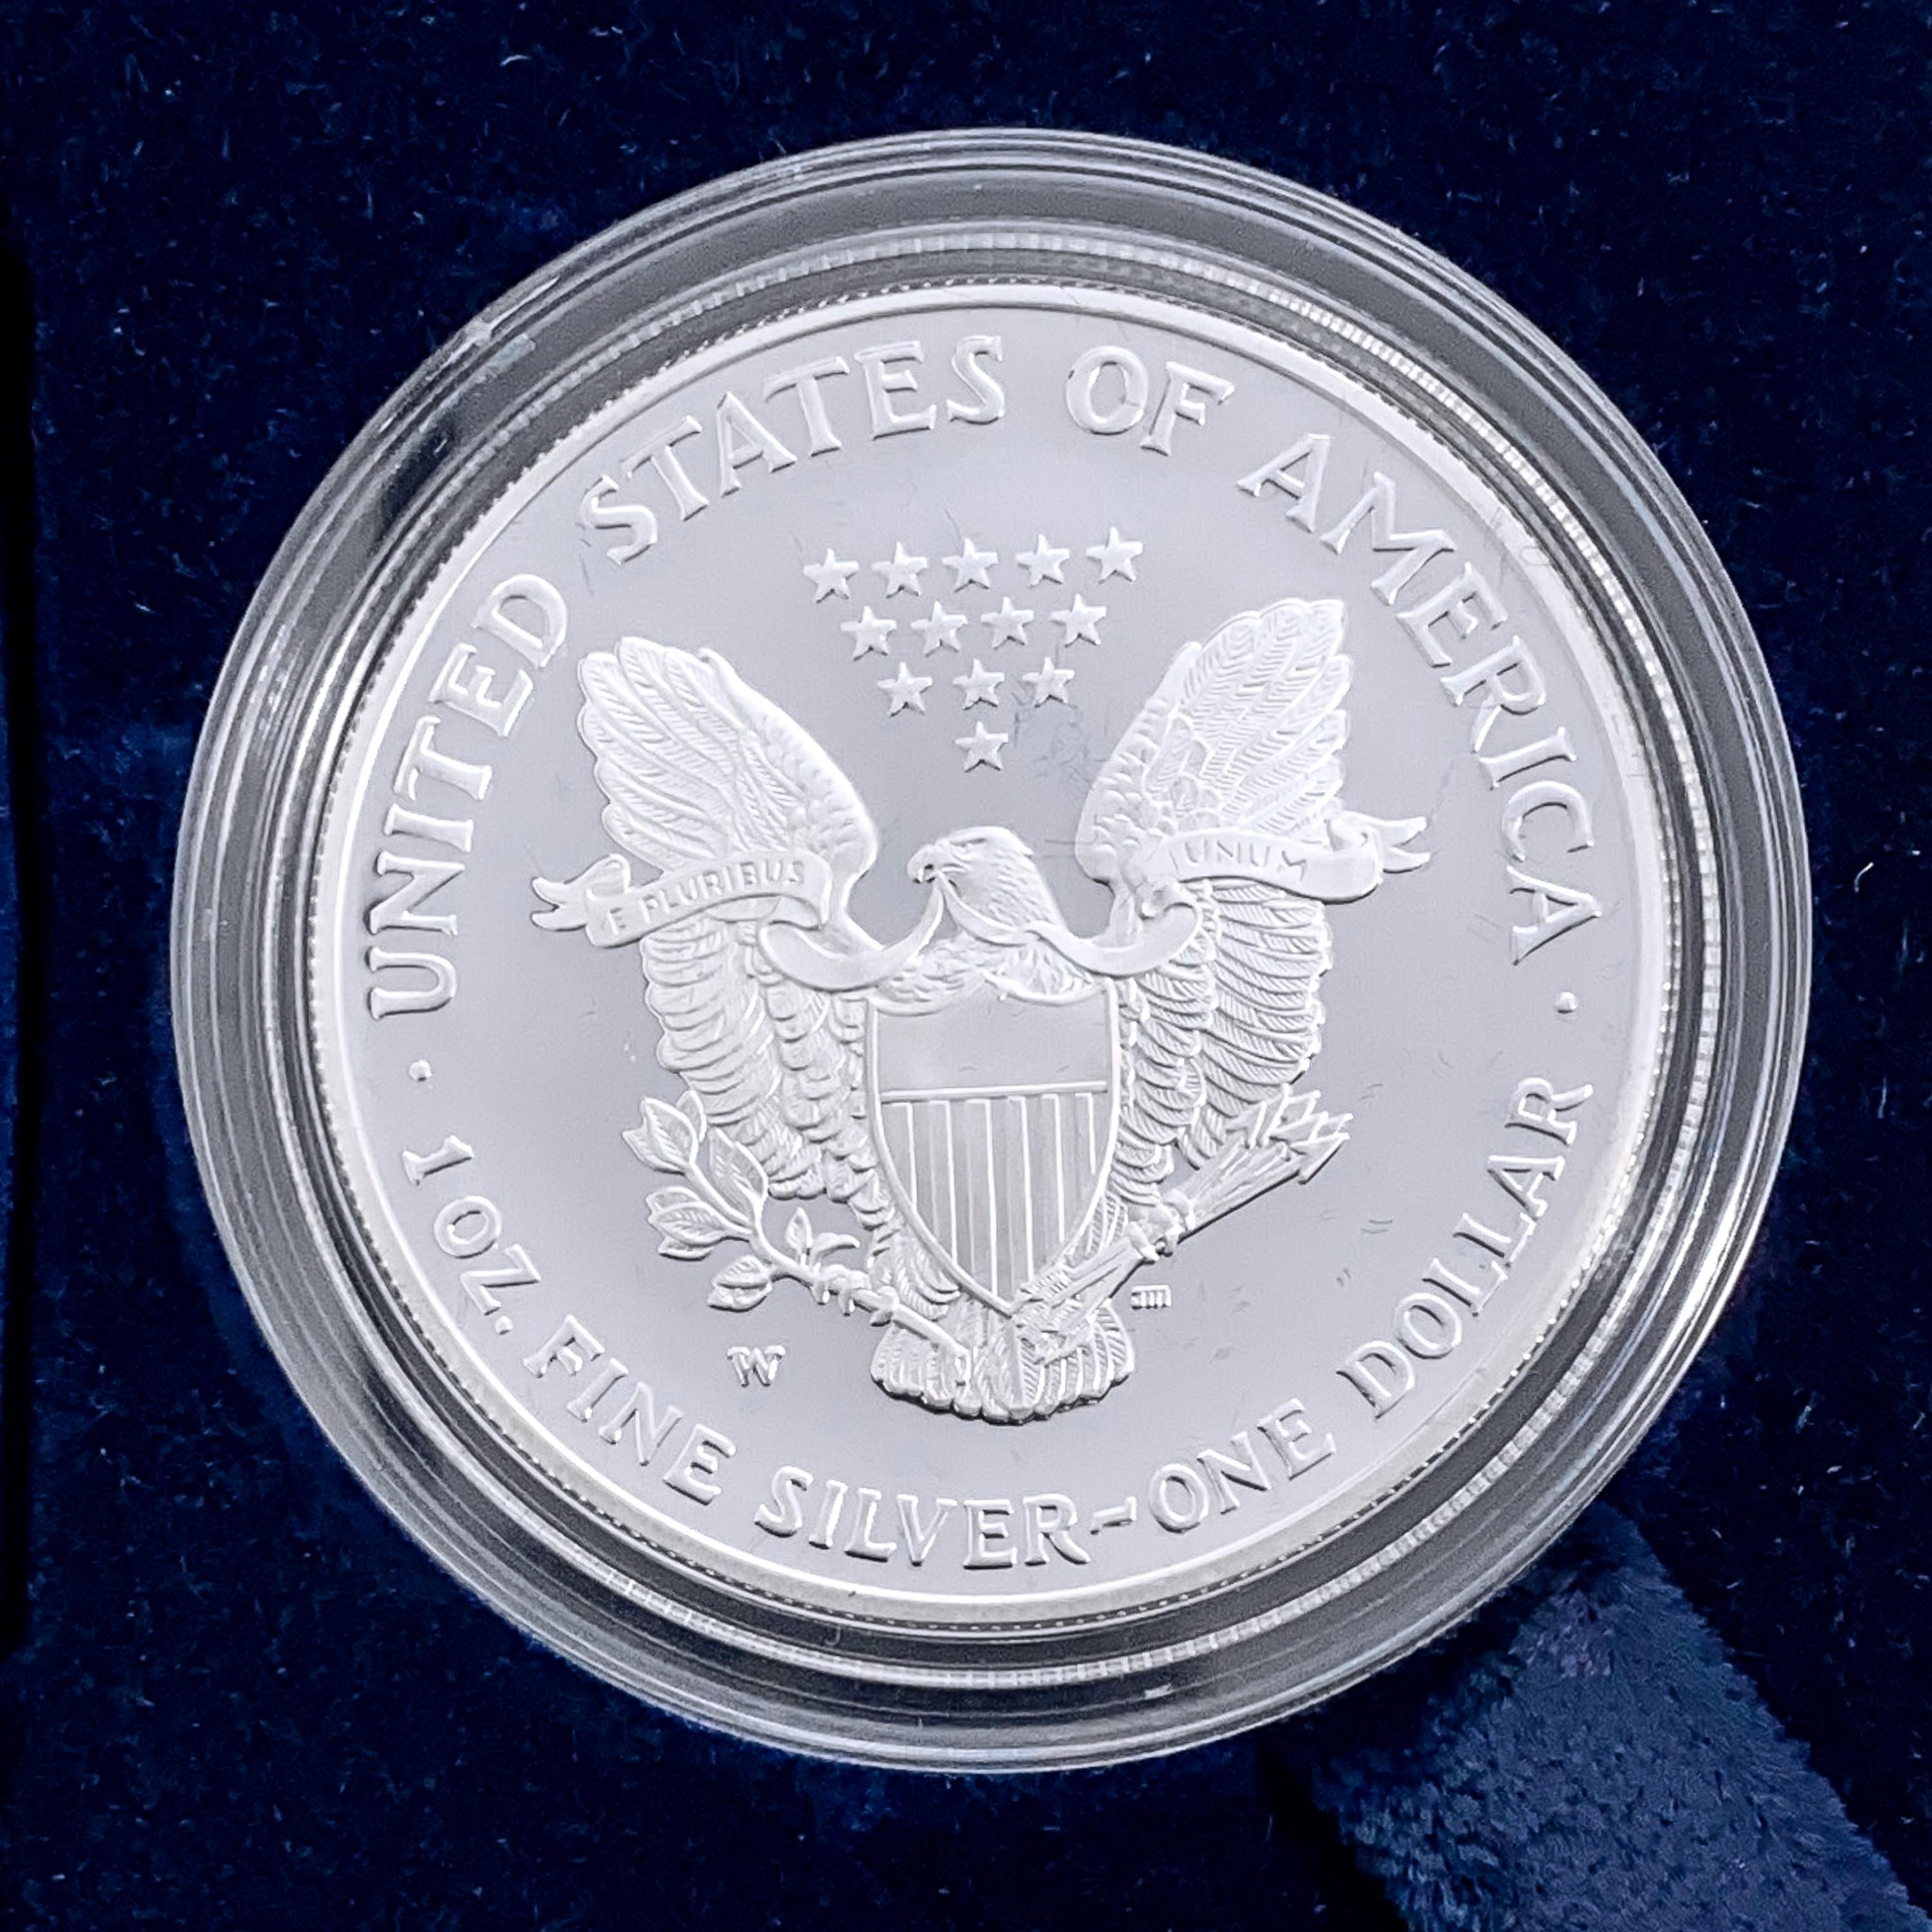 2004 US 1oz Silver Eagle Proof Coins [2 Coins]